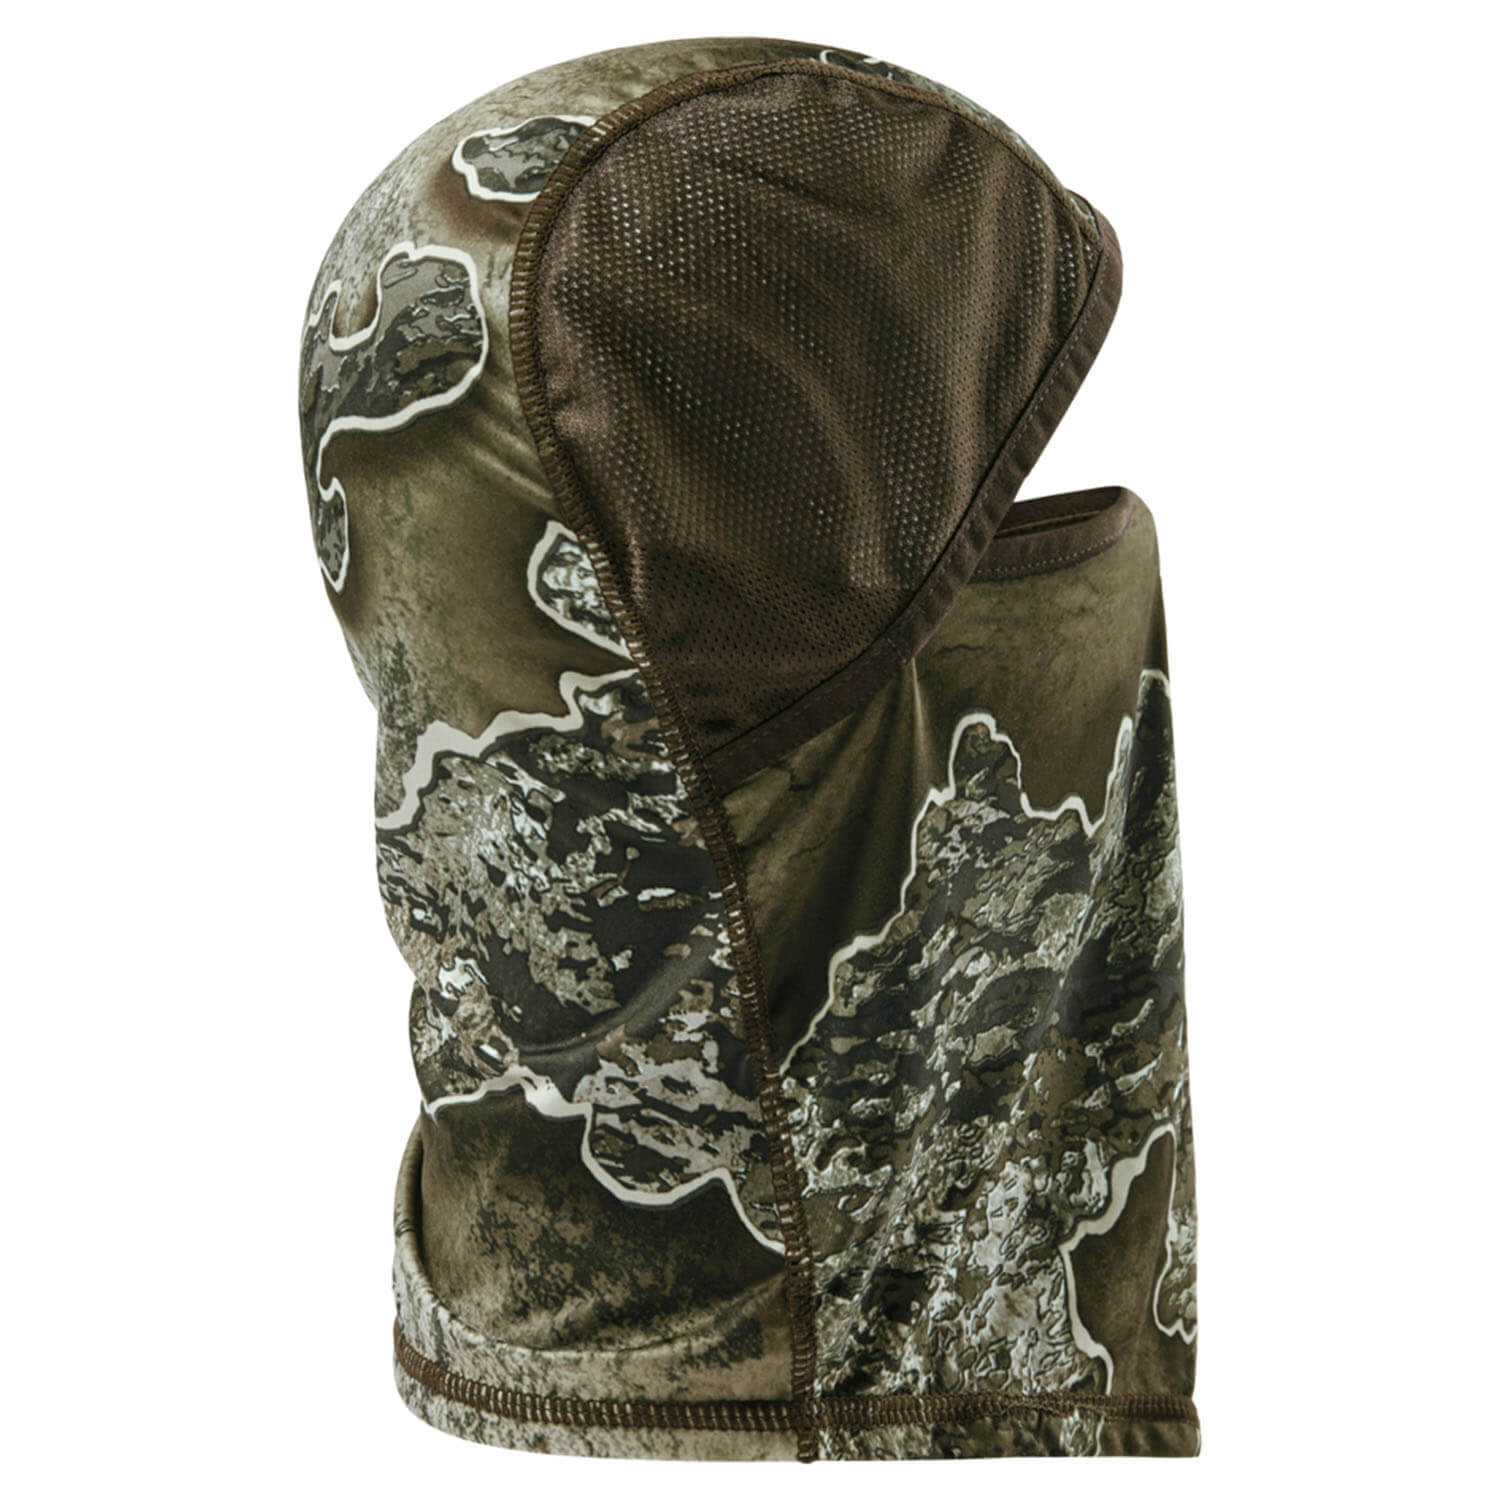 Deerhunter facemask excape (realtree excape)